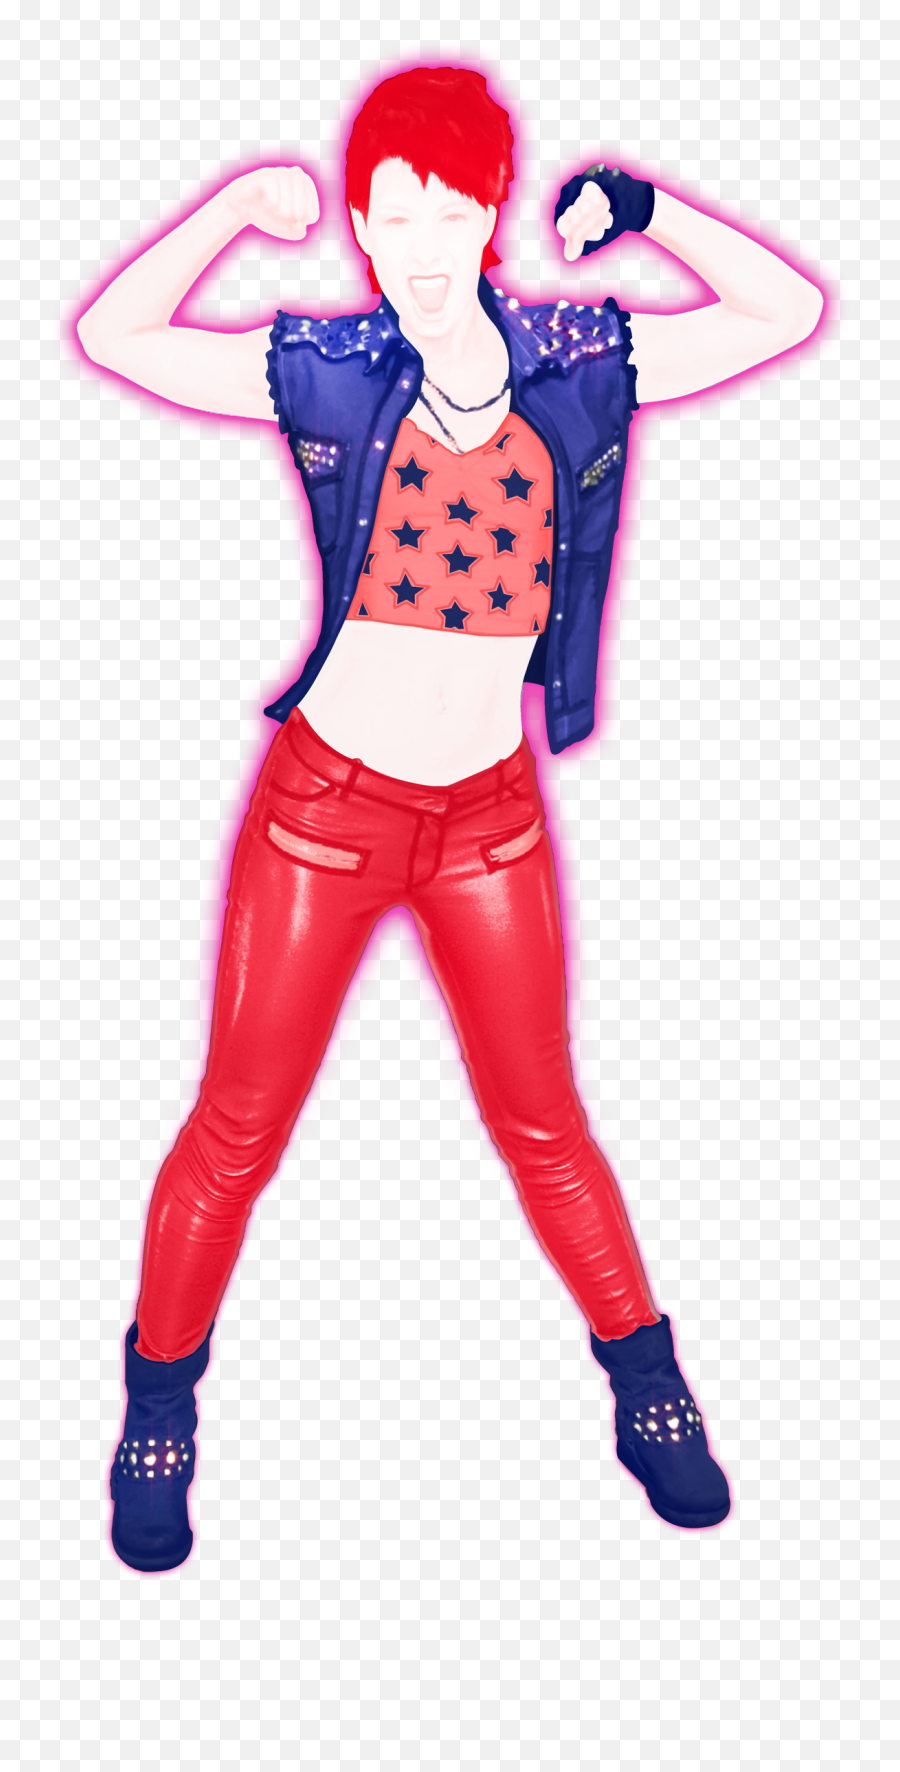 Just Dance 2016 Croquis Gaming Fashion Figures - Just Emoji,Clipart 2016